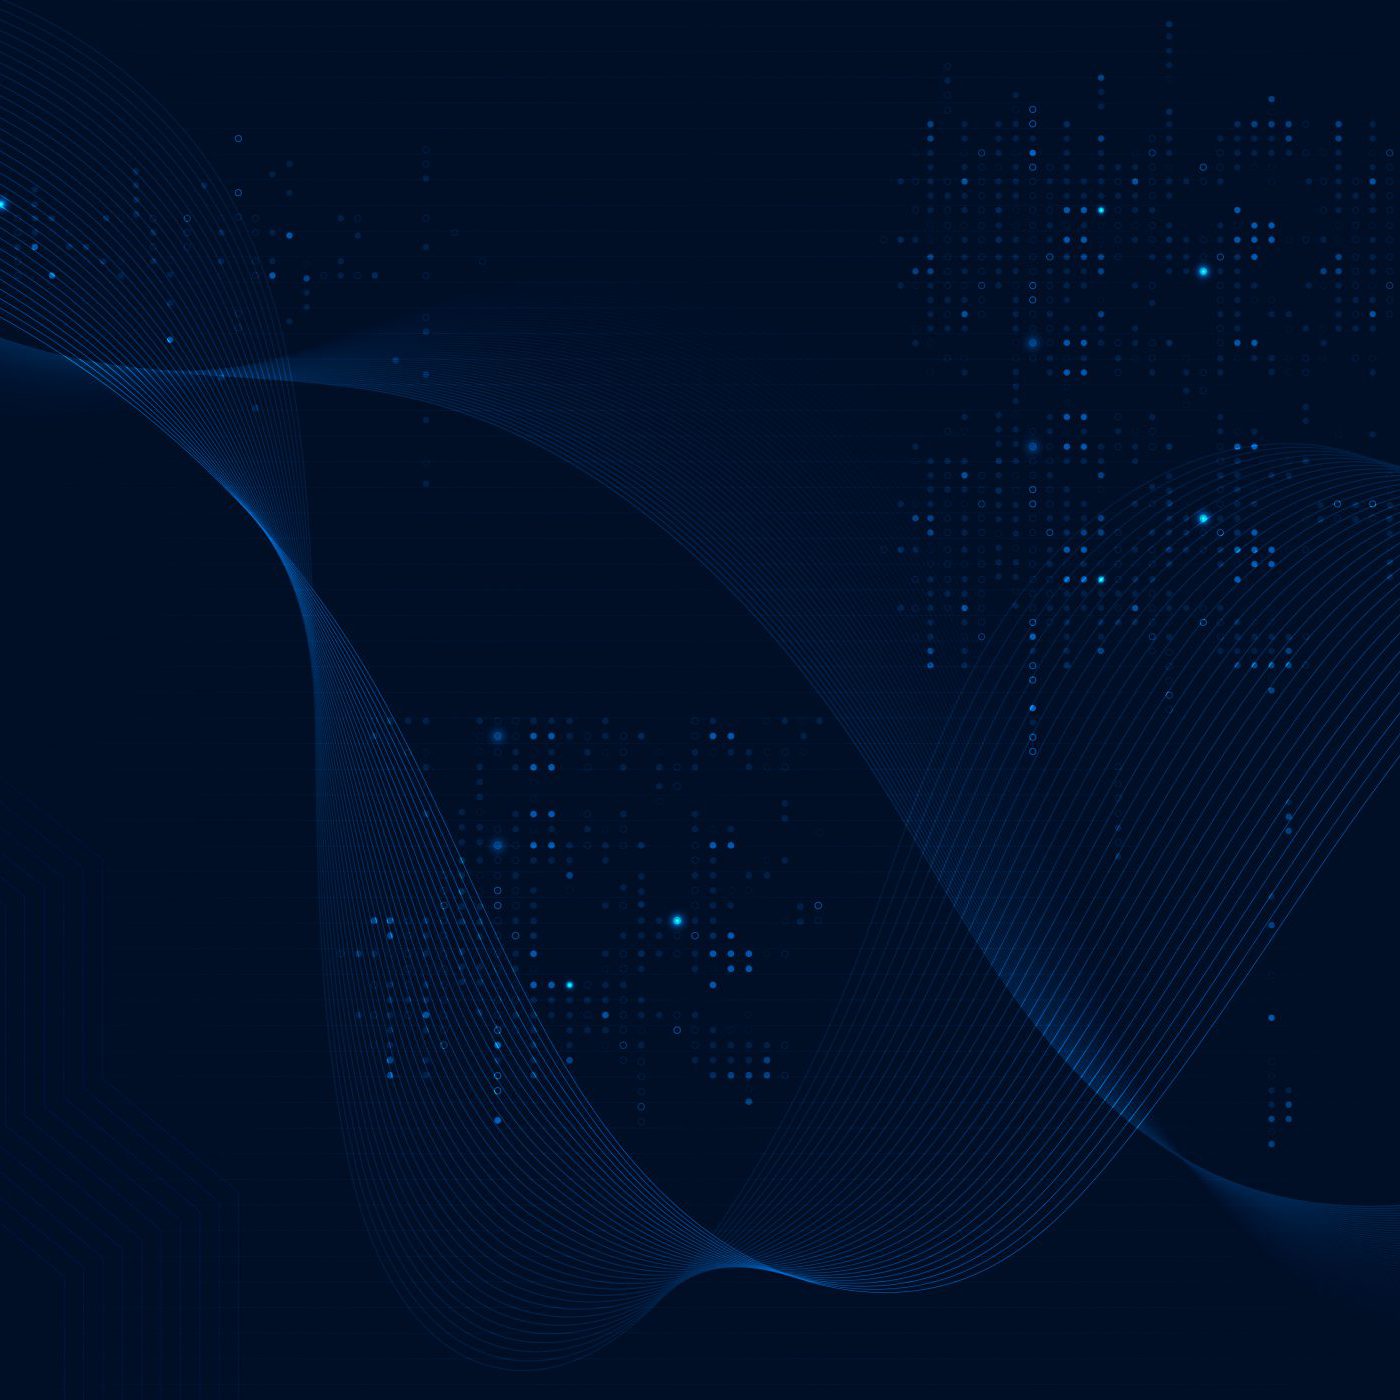 Blue futuristic waves background vector with computer code technology